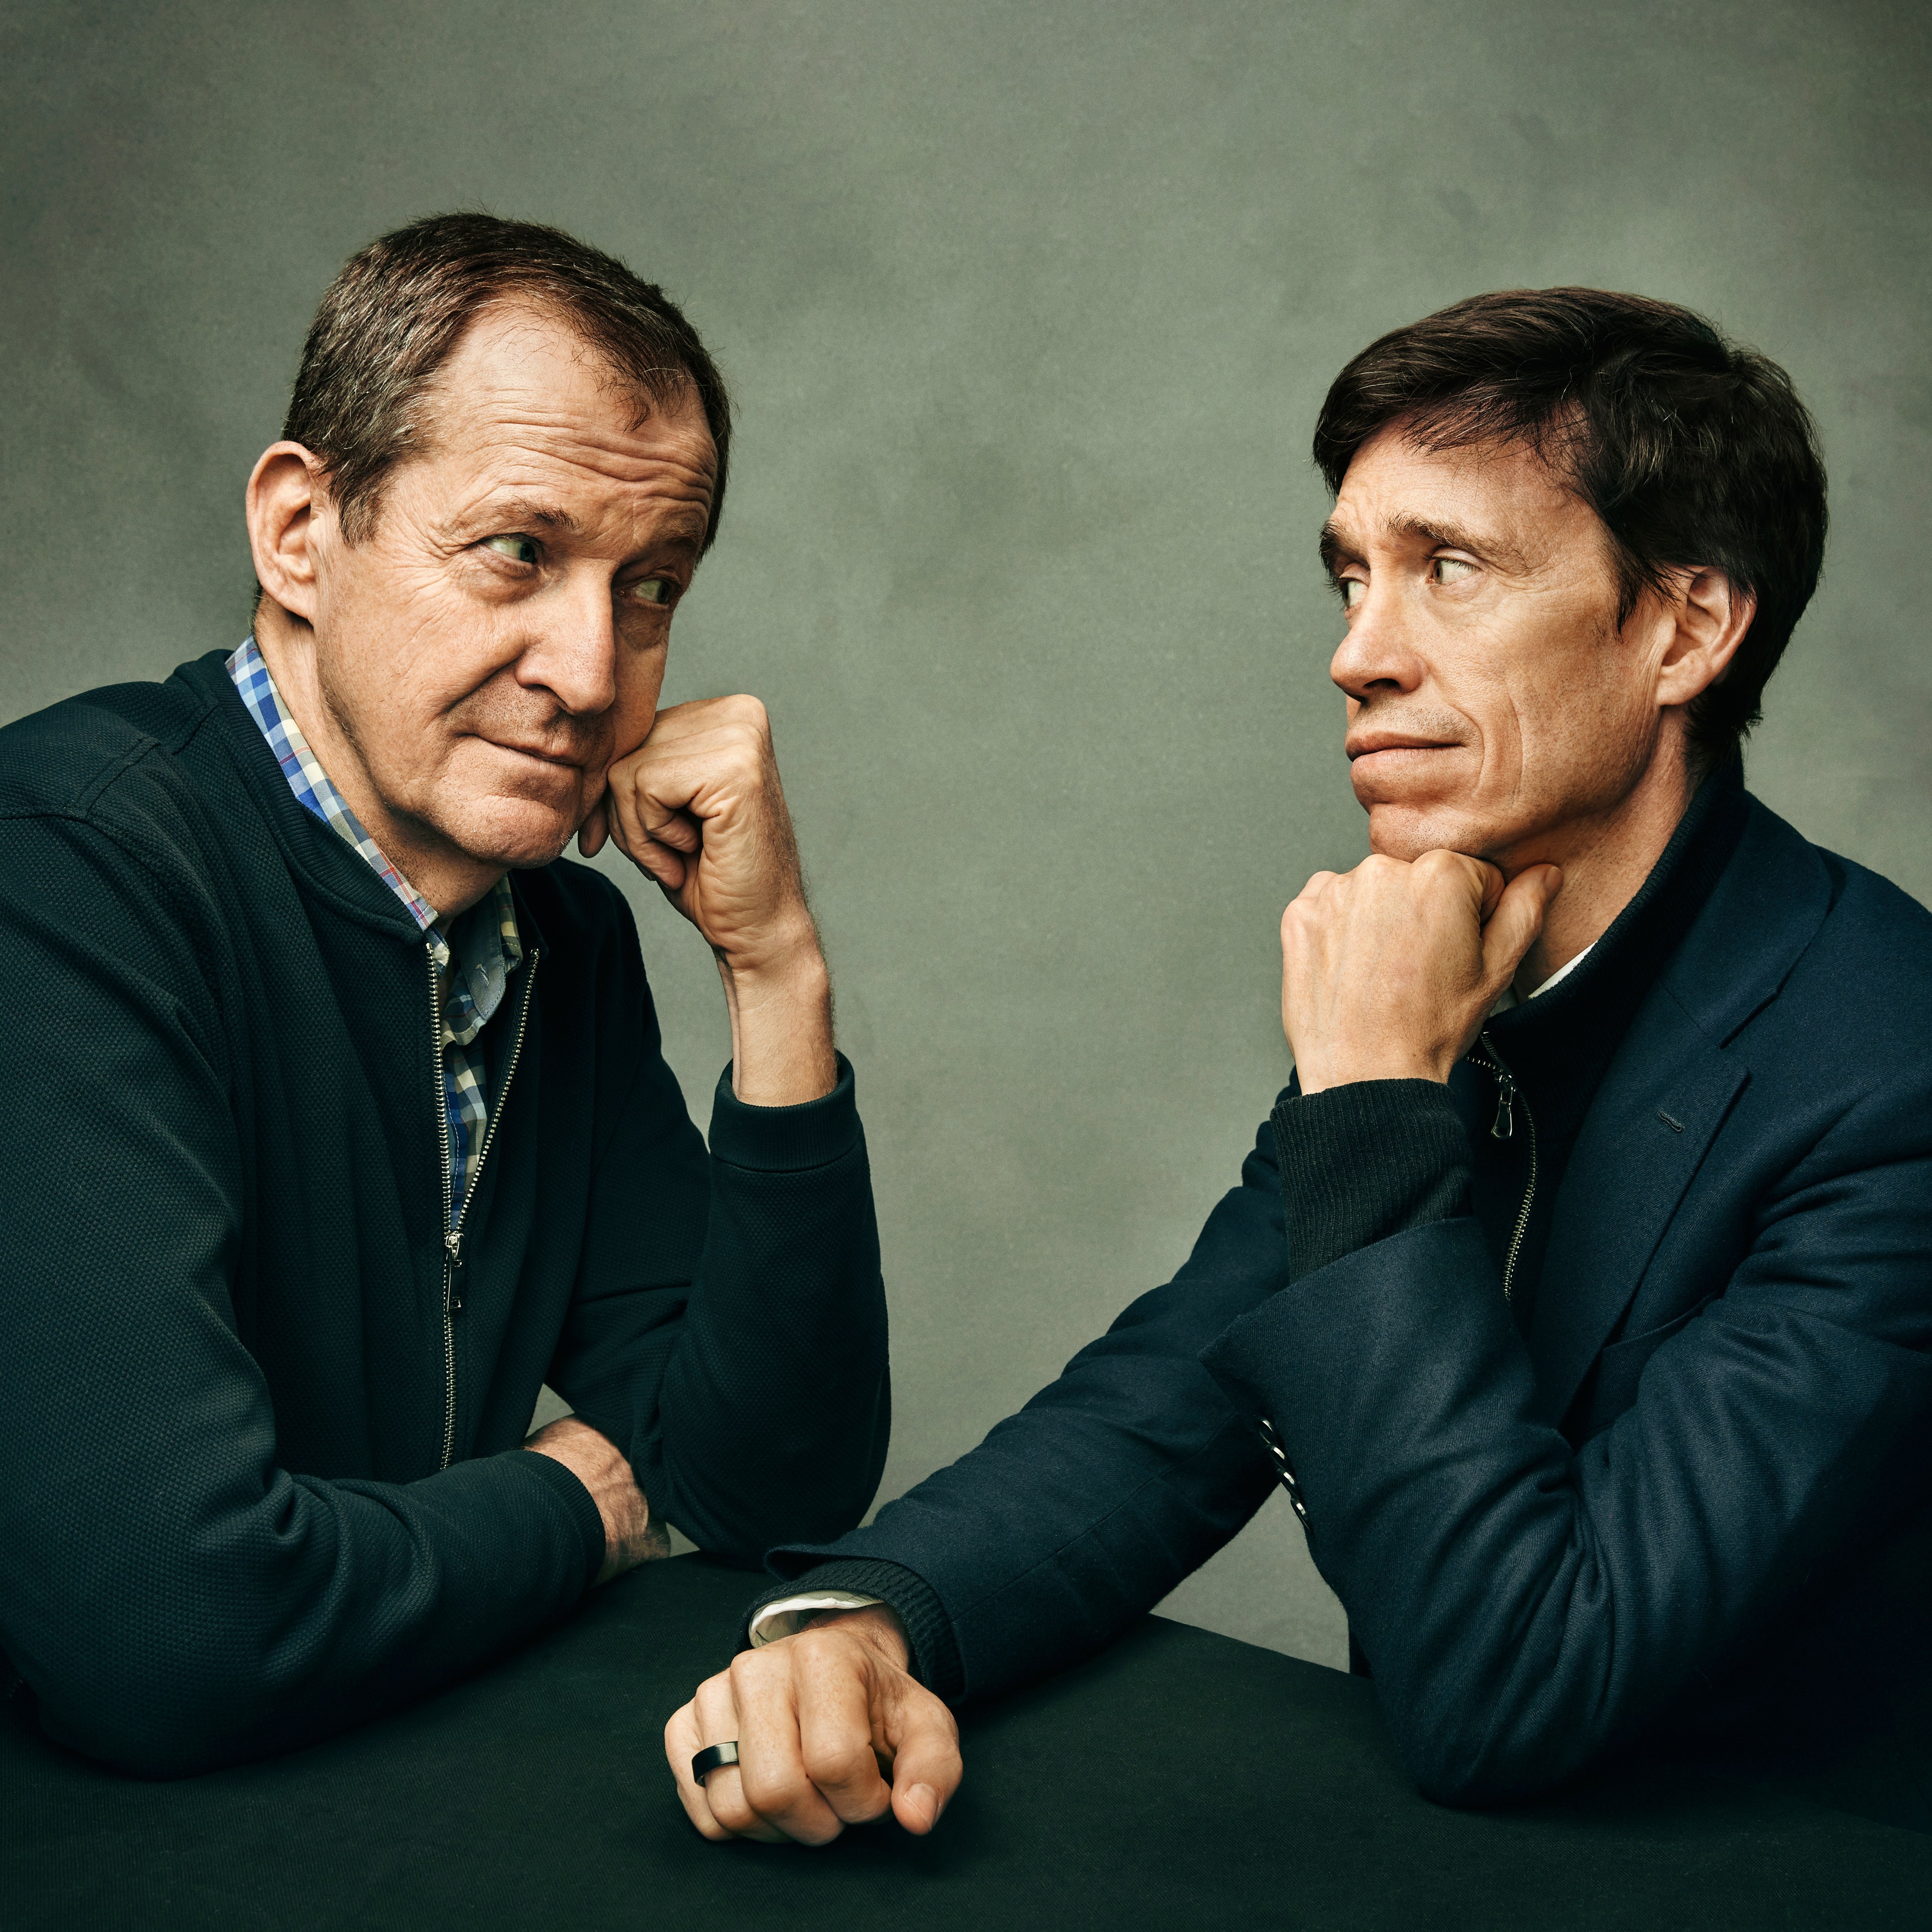 Alastair Campbell and Rory Stewart, the presenters of The Rest Is Politics